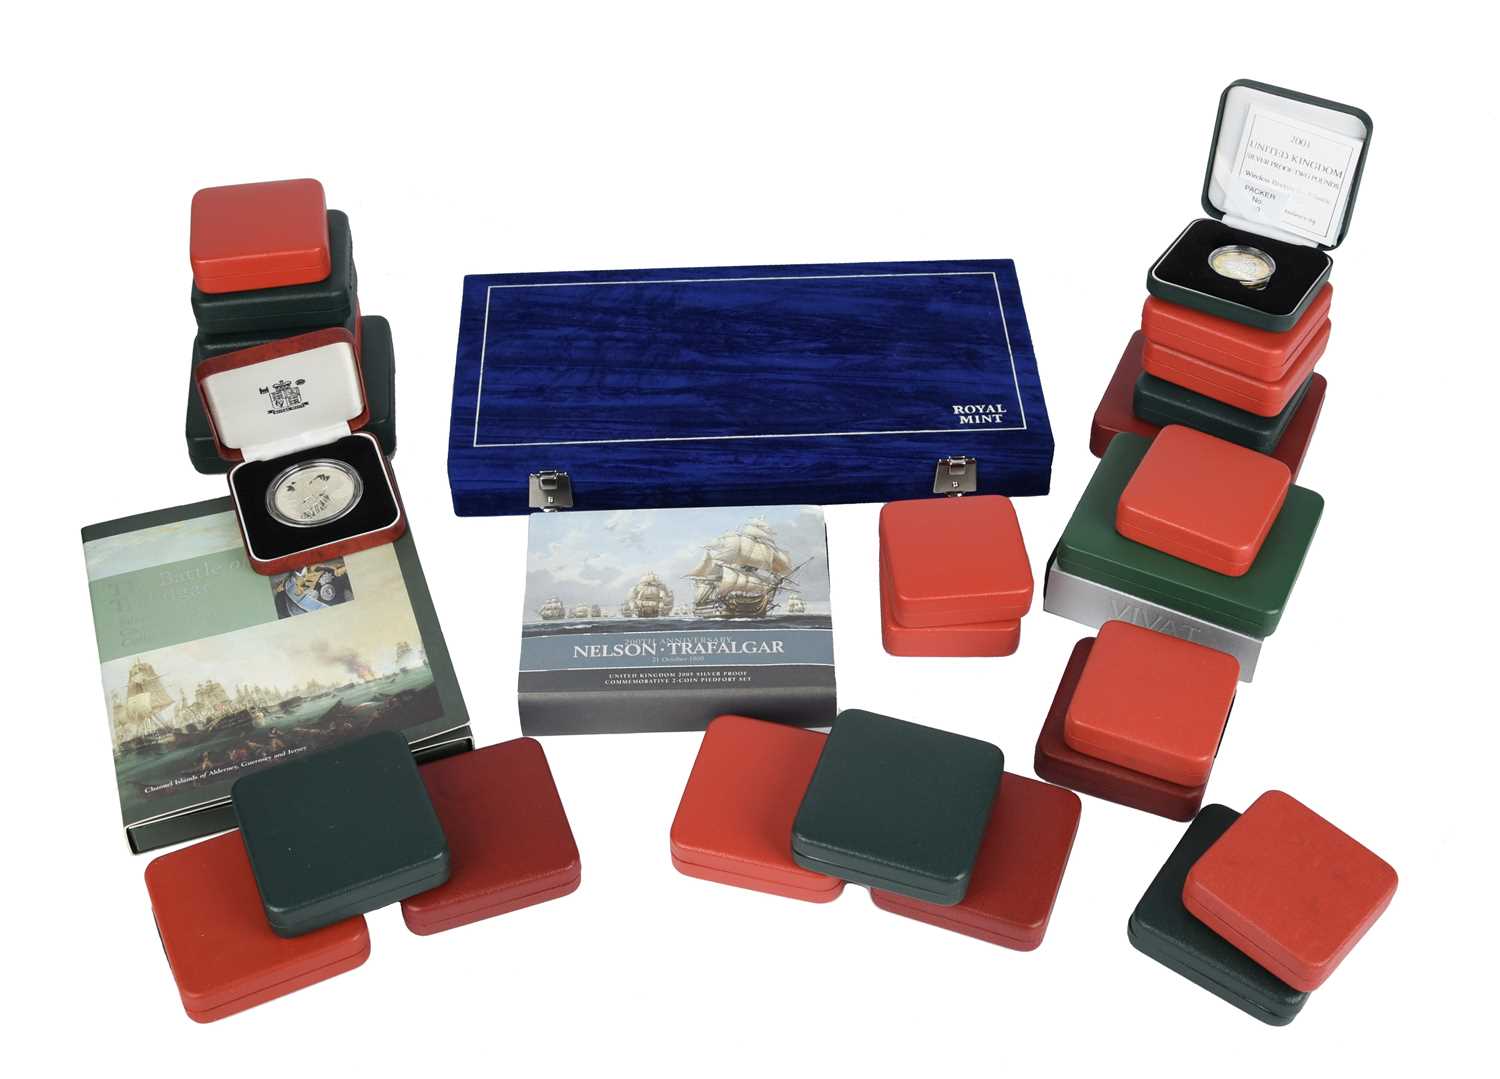 Elizabeth II: various silver proof issues, sets and singles, including: The United Kingdom Millenium